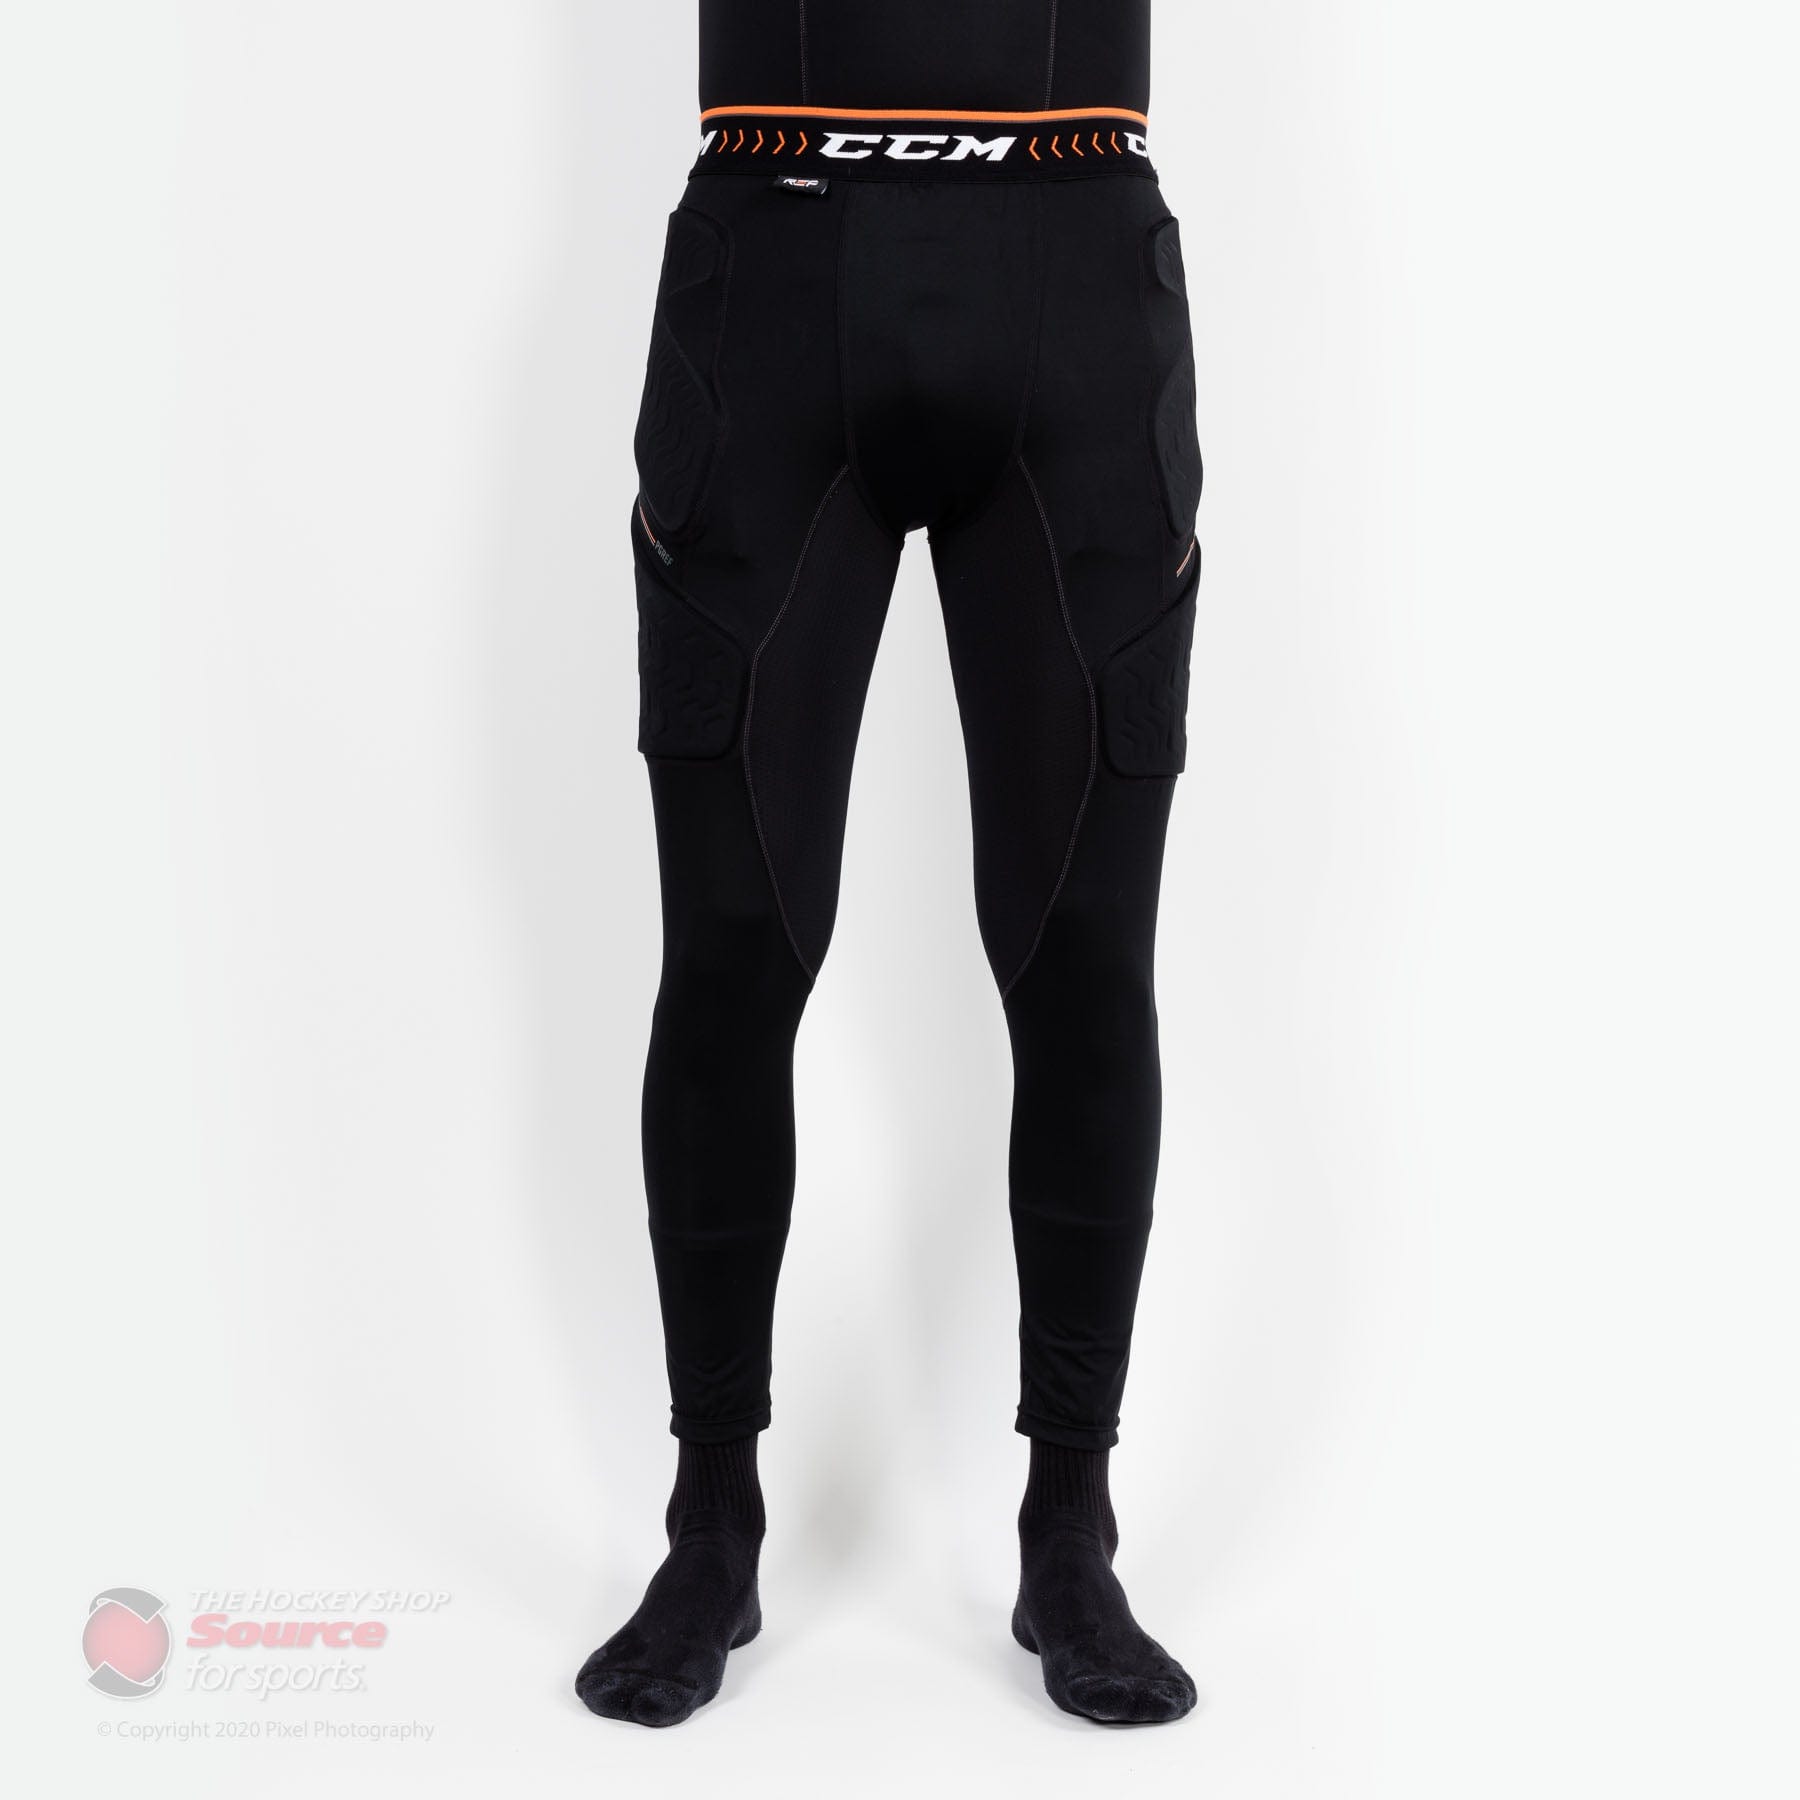 CCM Padded All-In-One Referee Pants